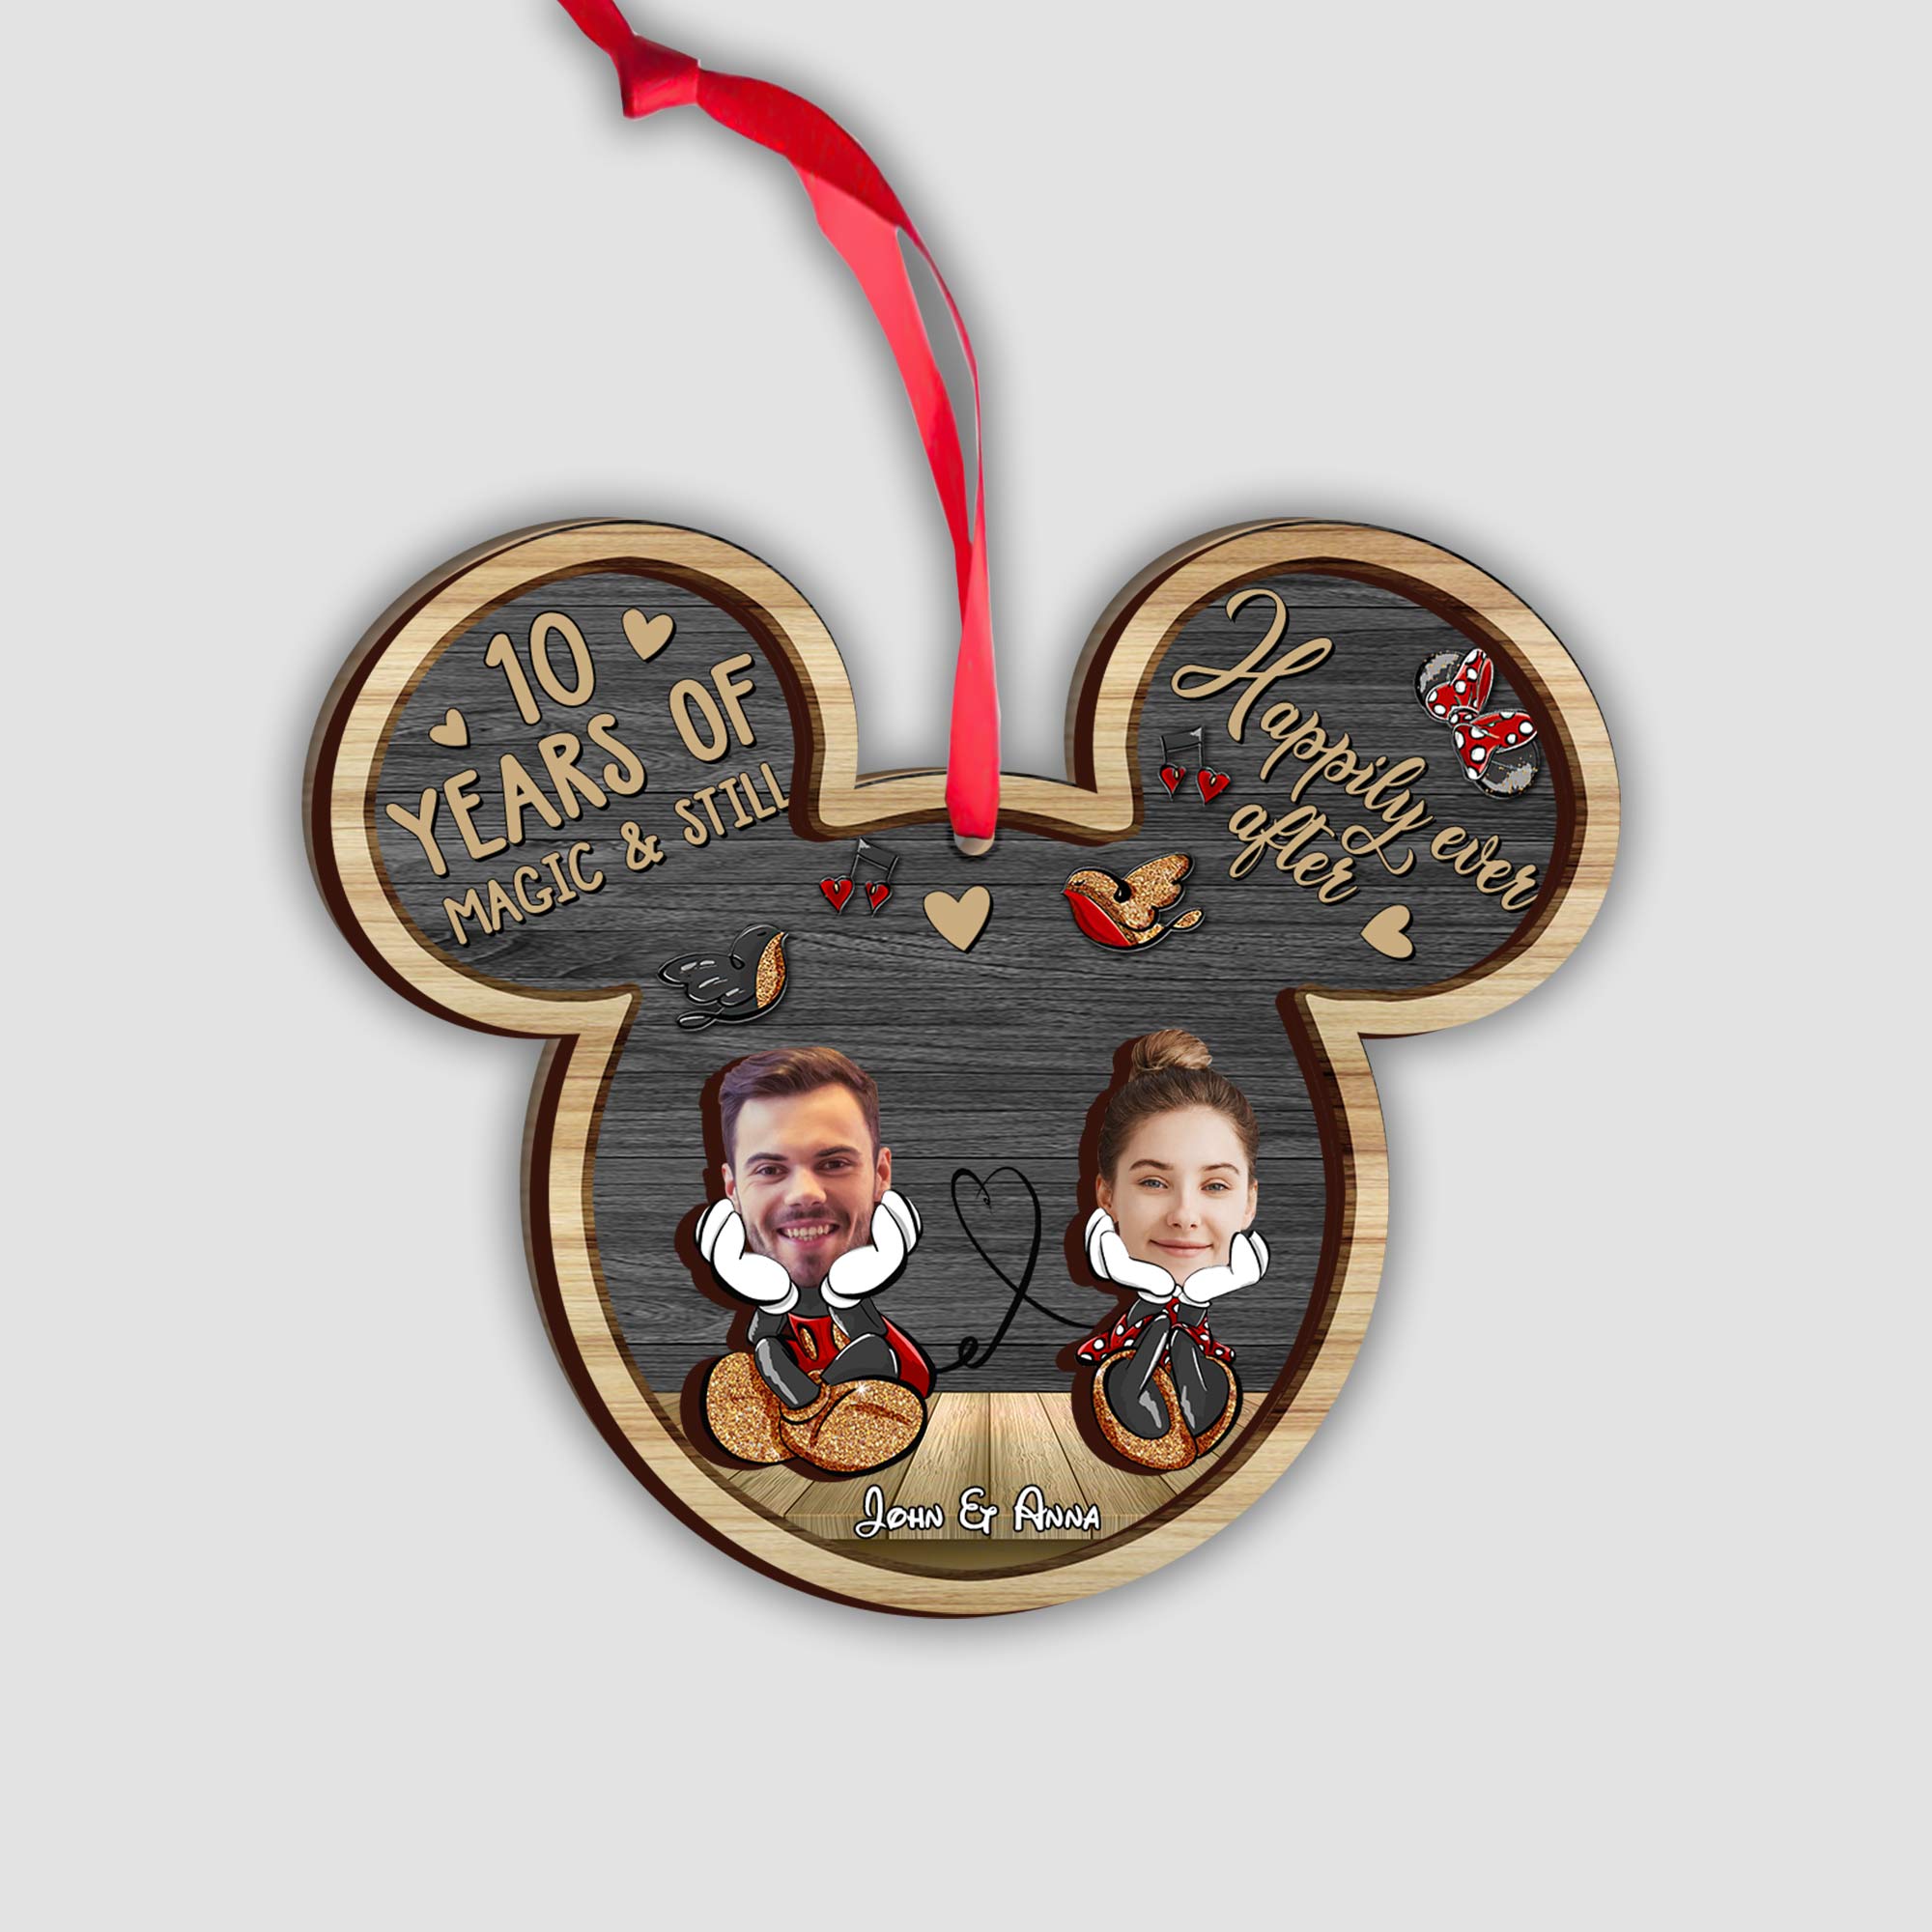 Years Of Magic - Personalized Mouse 2 Layered Piece Ornament